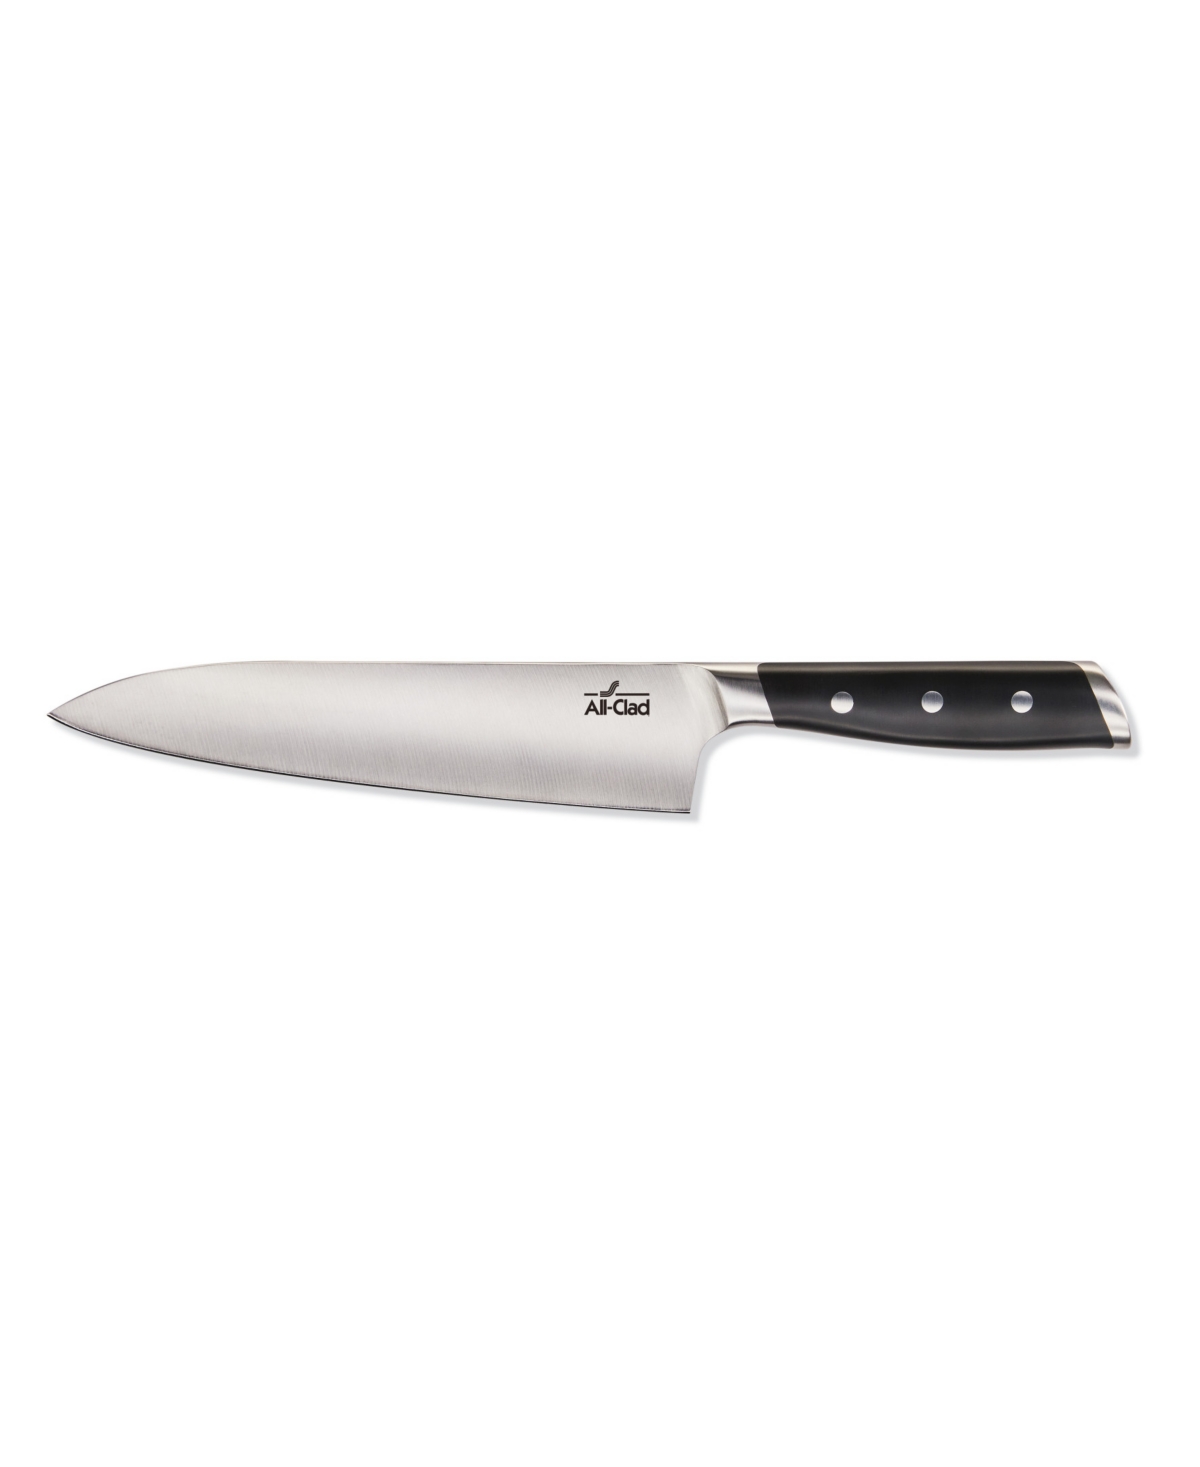 All-clad 8" Chef's Knife In Red